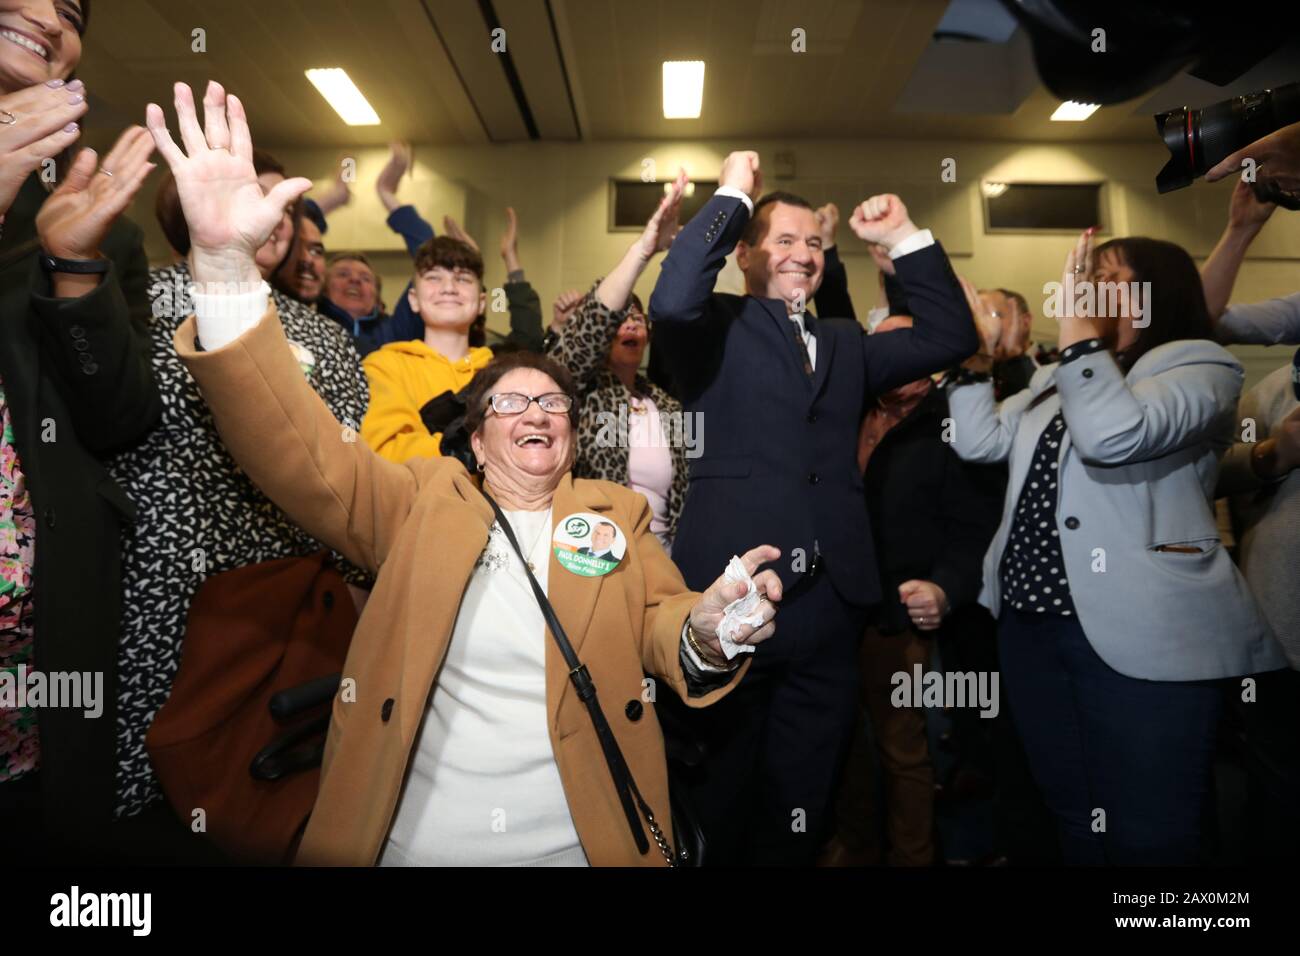 Dublin, Ireland. 9th Feb, 2020. General Election 2020. Counting of votes. Man of the moment Paul Donnelly of Sinn Fein celebrates with his mother Bridie (left), and family and supporters after being elected on the first count in the count centre in the Phibblestown Community Centre in Dublin West. He came in ahead of the Taoiseach Leo Varadkar, who was only elected on the 5th count. Photo: Eamonn Farrell/RollingNews.ie/Alamy Live News Credit: RollingNews.ie/Alamy Live News Stock Photo